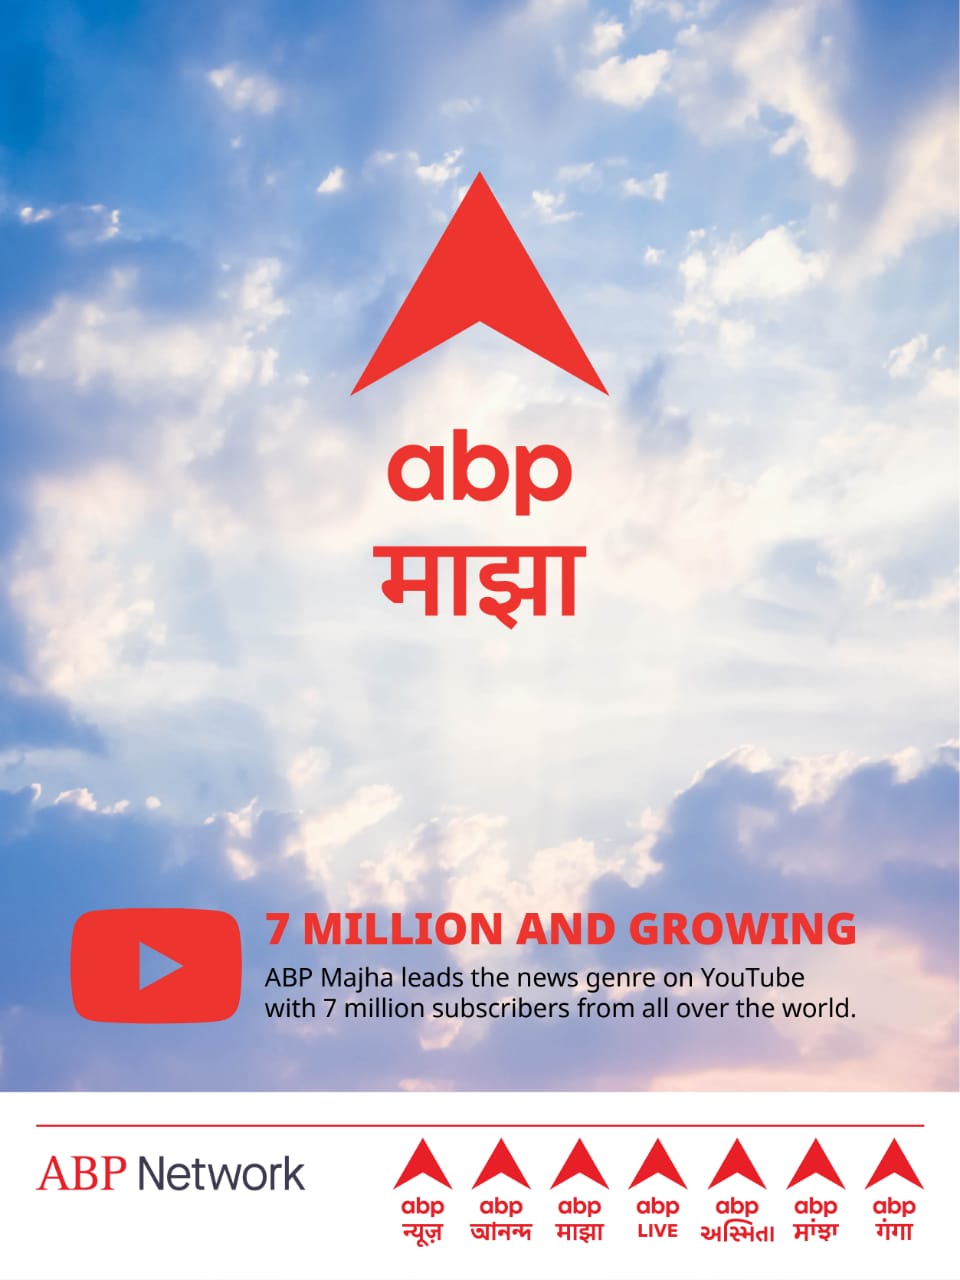 abp-majha-rules-the-news-genre-with-a-whopping-7-million-subscribers-on-youtube